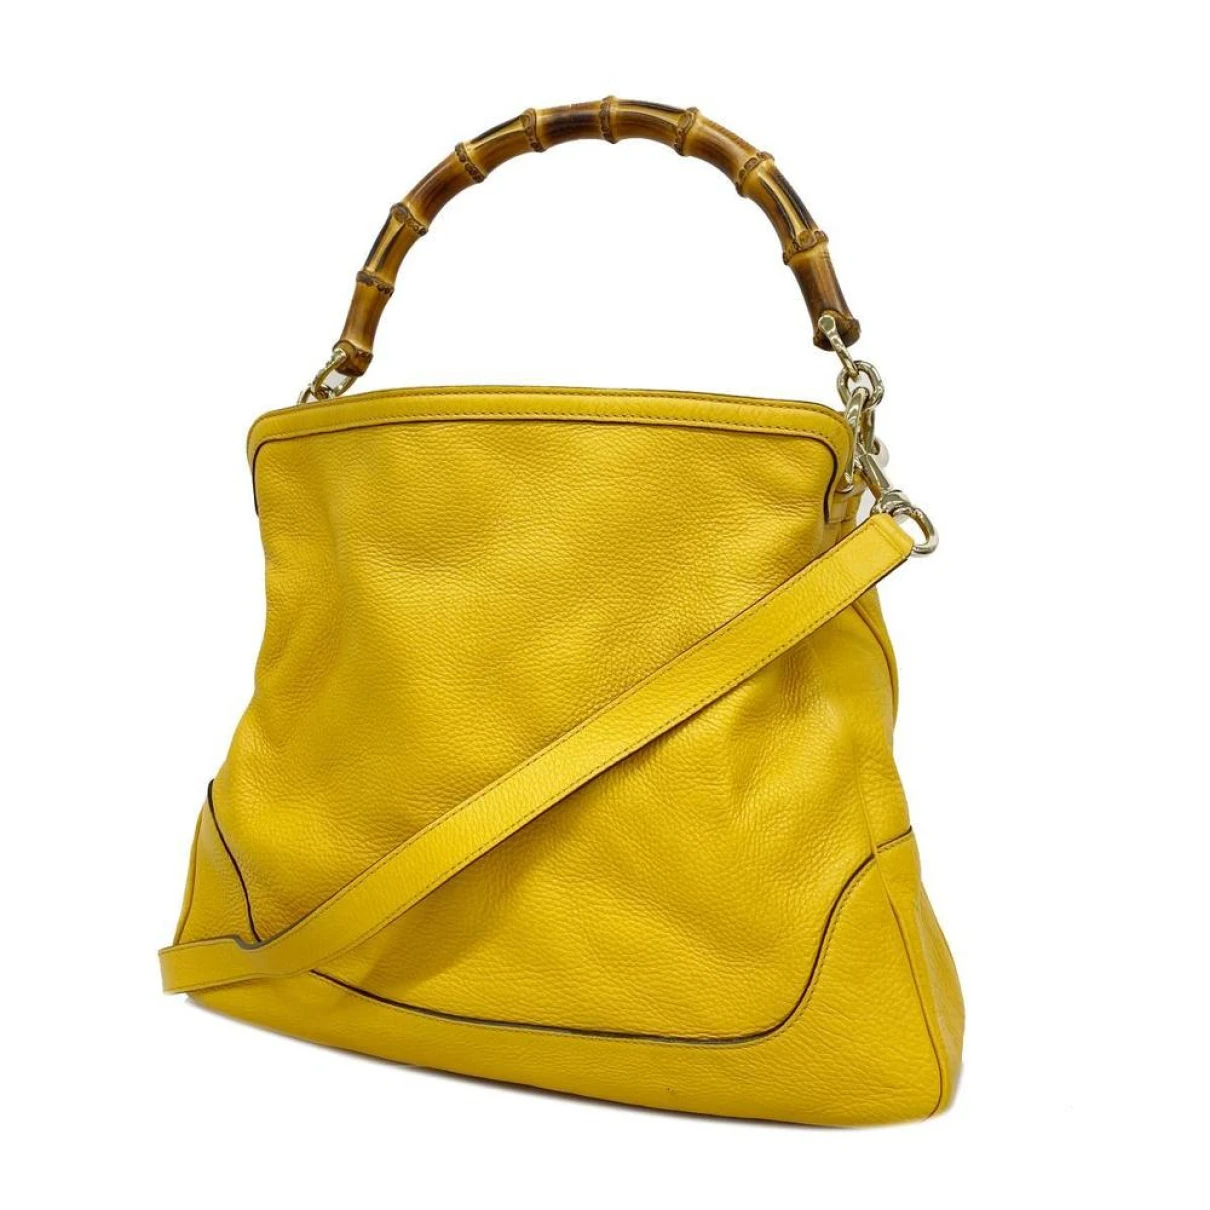 Pre-owned Gucci Bamboo Leather Handbag In Yellow